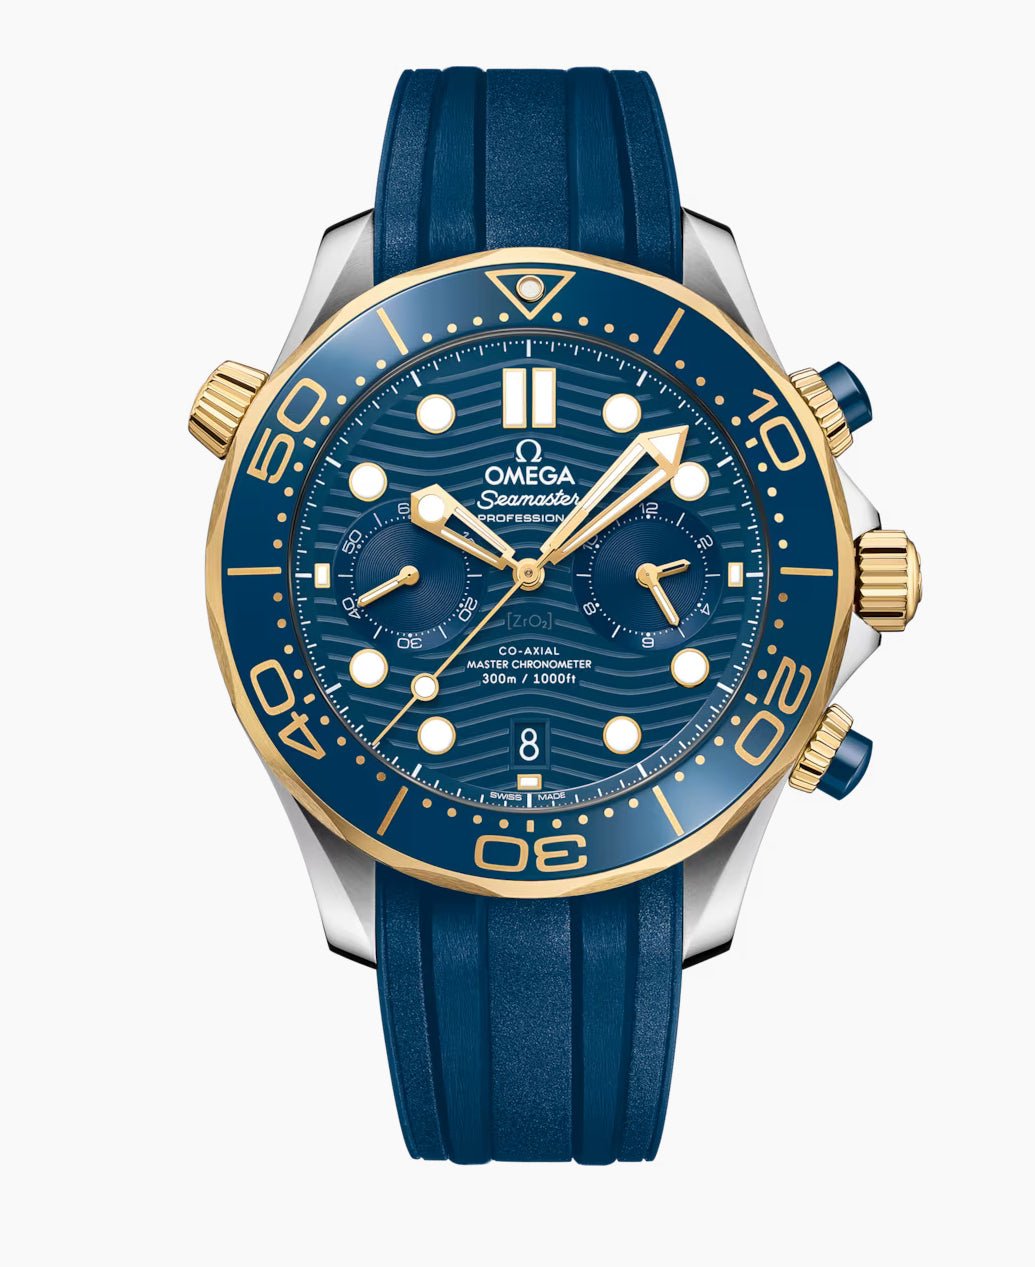 Omega-SEAMASTER DIVER 300M
44 mm, steel ‑ yellow gold on rubber strap
210.22.44.51.03.001